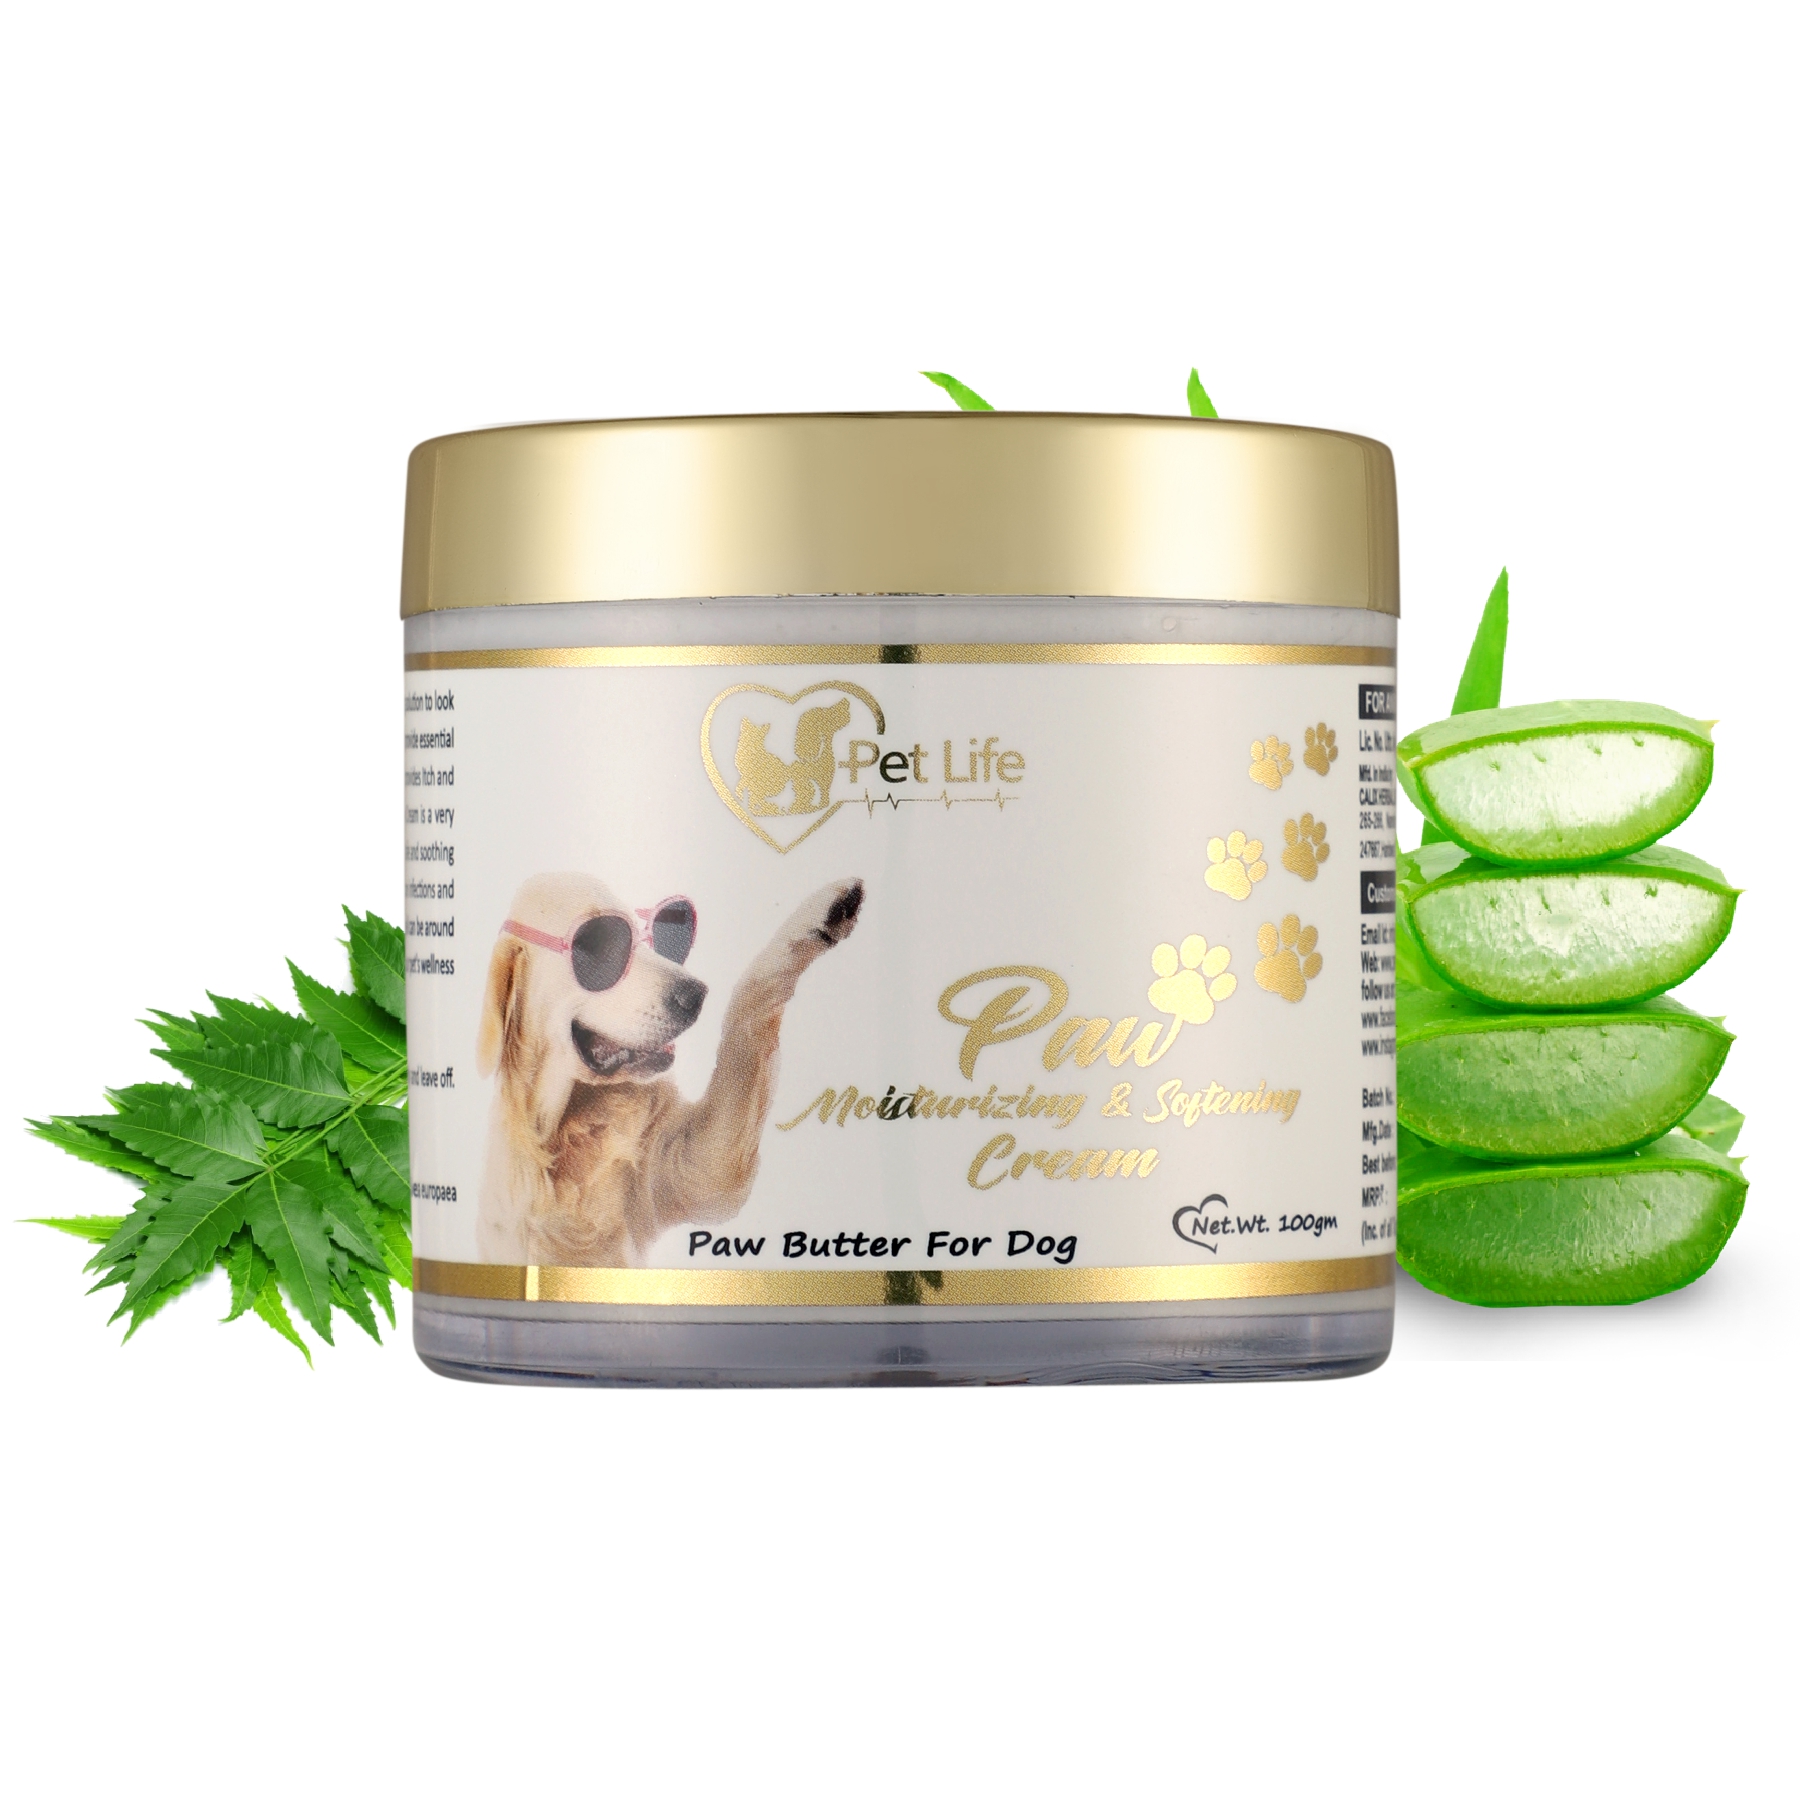 Pet Life Organic Paw Moisturizing & Softening Cream for Dog Cracked & Chapped Paws|Paw Butter Repair, Sooth & Heals Dry Paw & Elbow|Paw Butter Cream for All Dog Breeds - Safe Pet Friendly